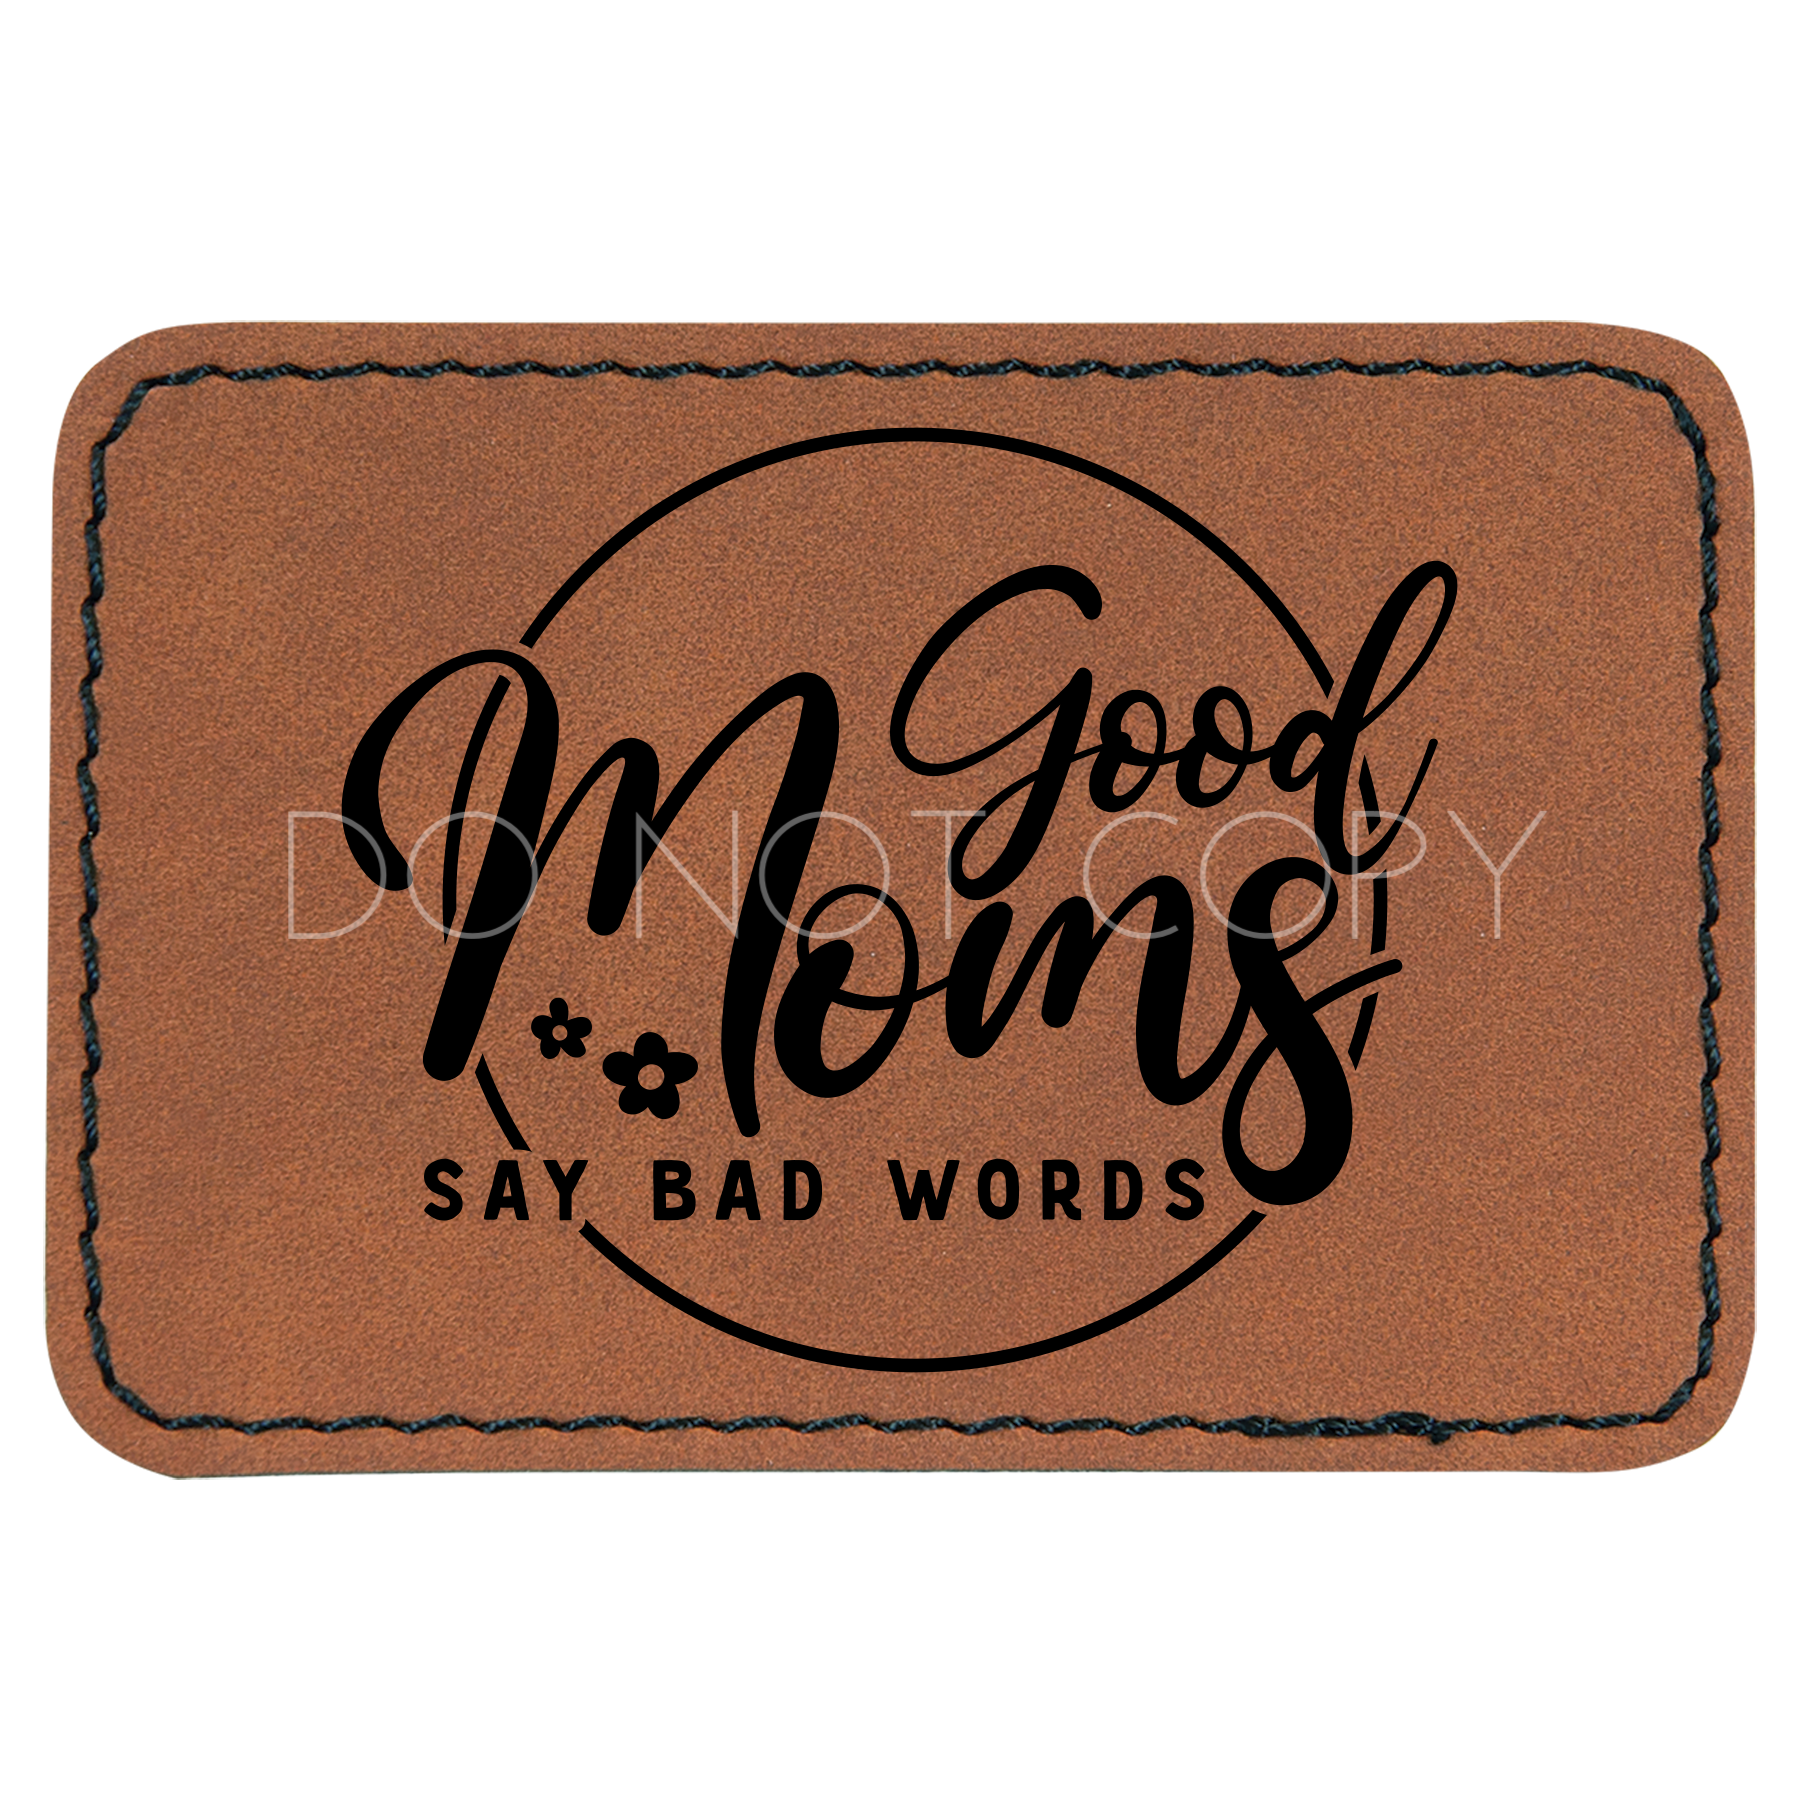 Good Moms Say Bad Words Patch